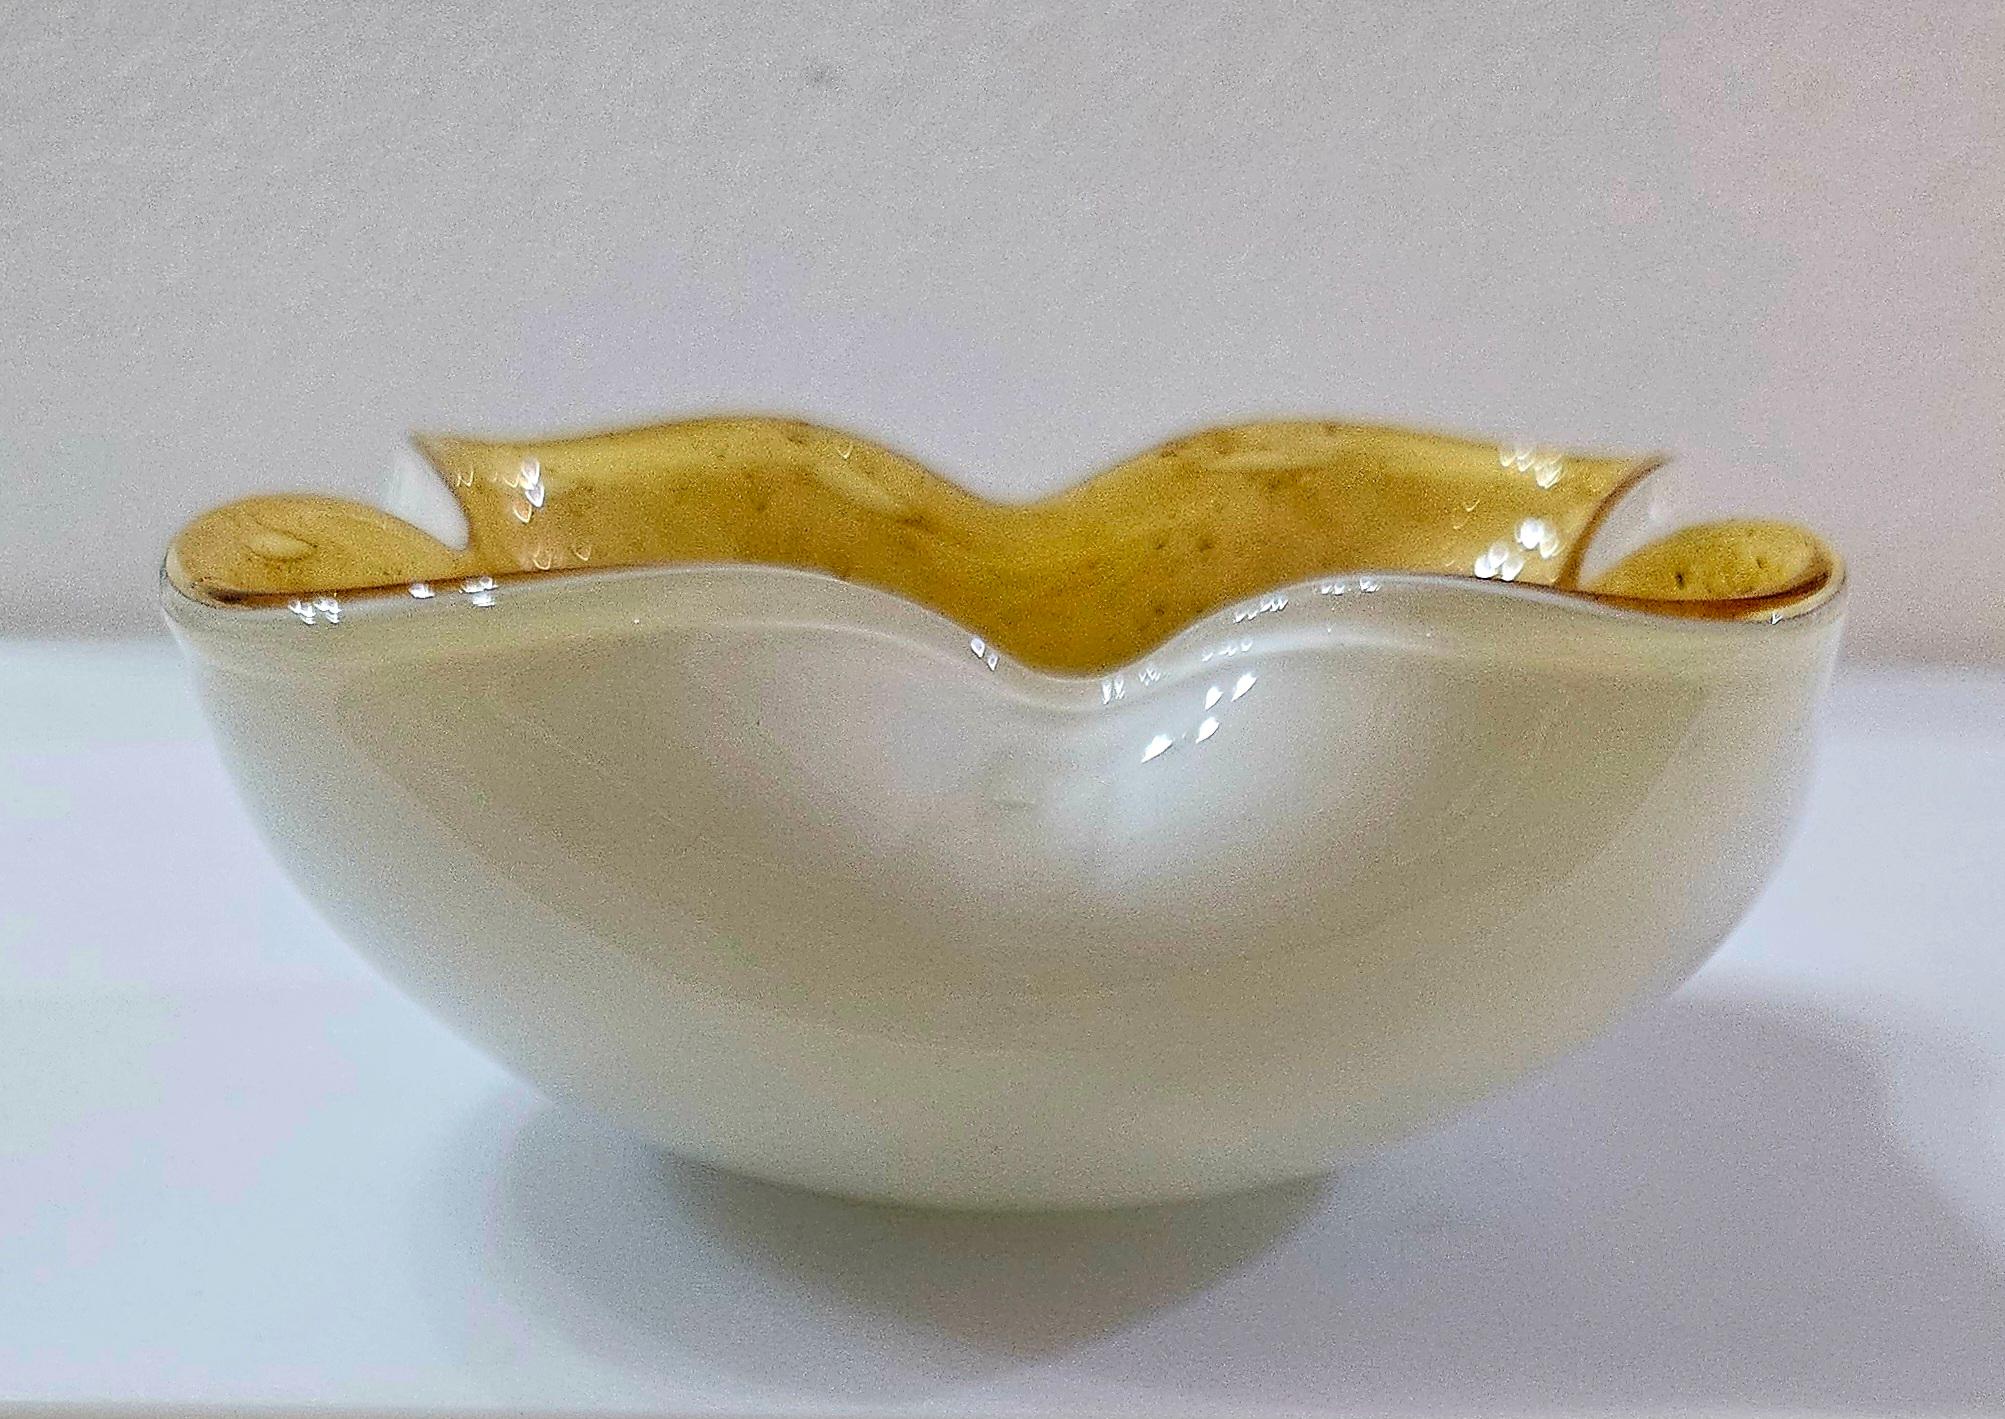 Vintage Murano Glass Bowl / Dish / Ashtray / Catch-All In Fair Condition For Sale In Warrenton, OR